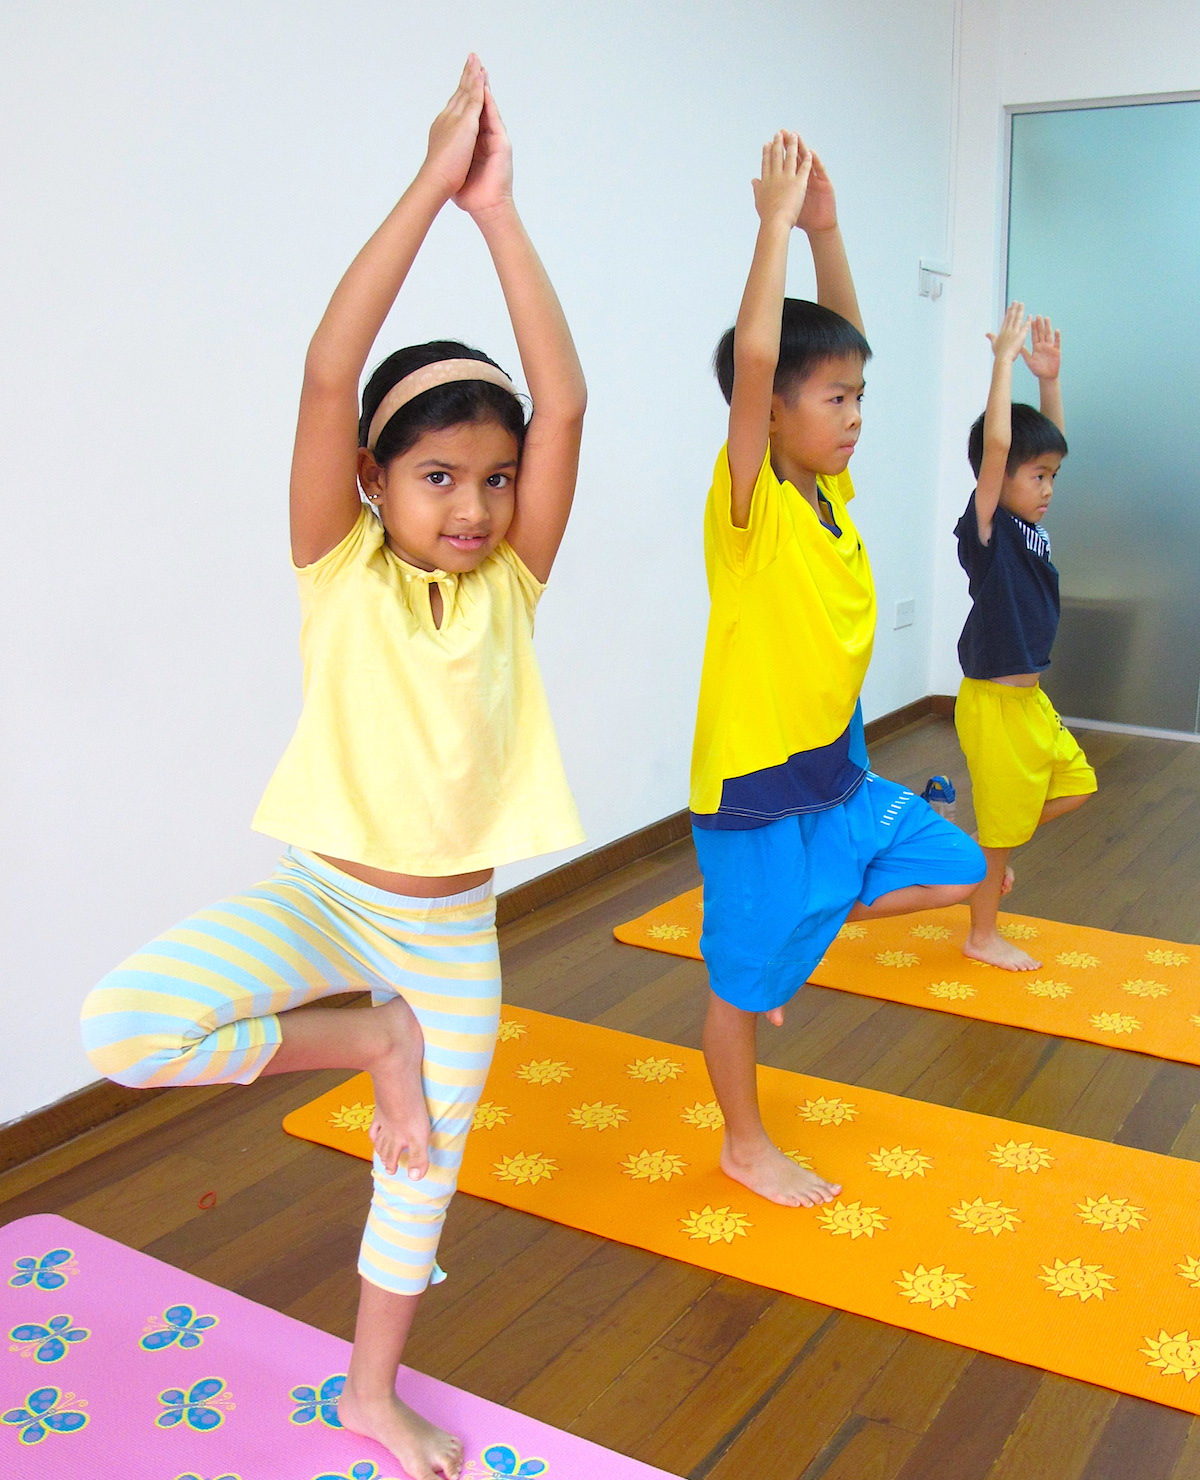 Yoga Poses for Kids to Boost Immunity